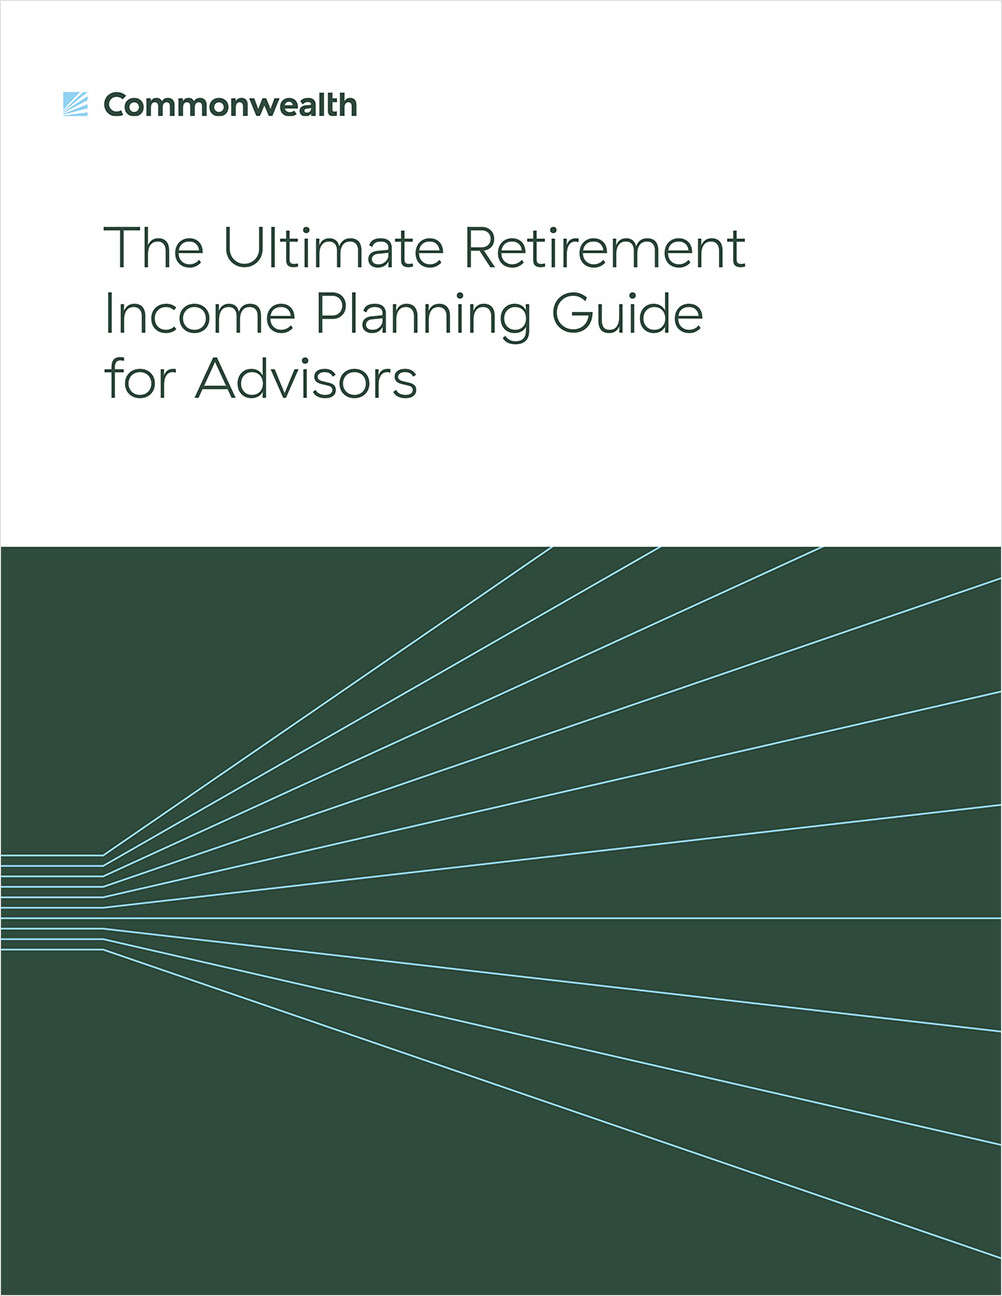 The Ultimate Retirement Income Planning Guide for Advisors